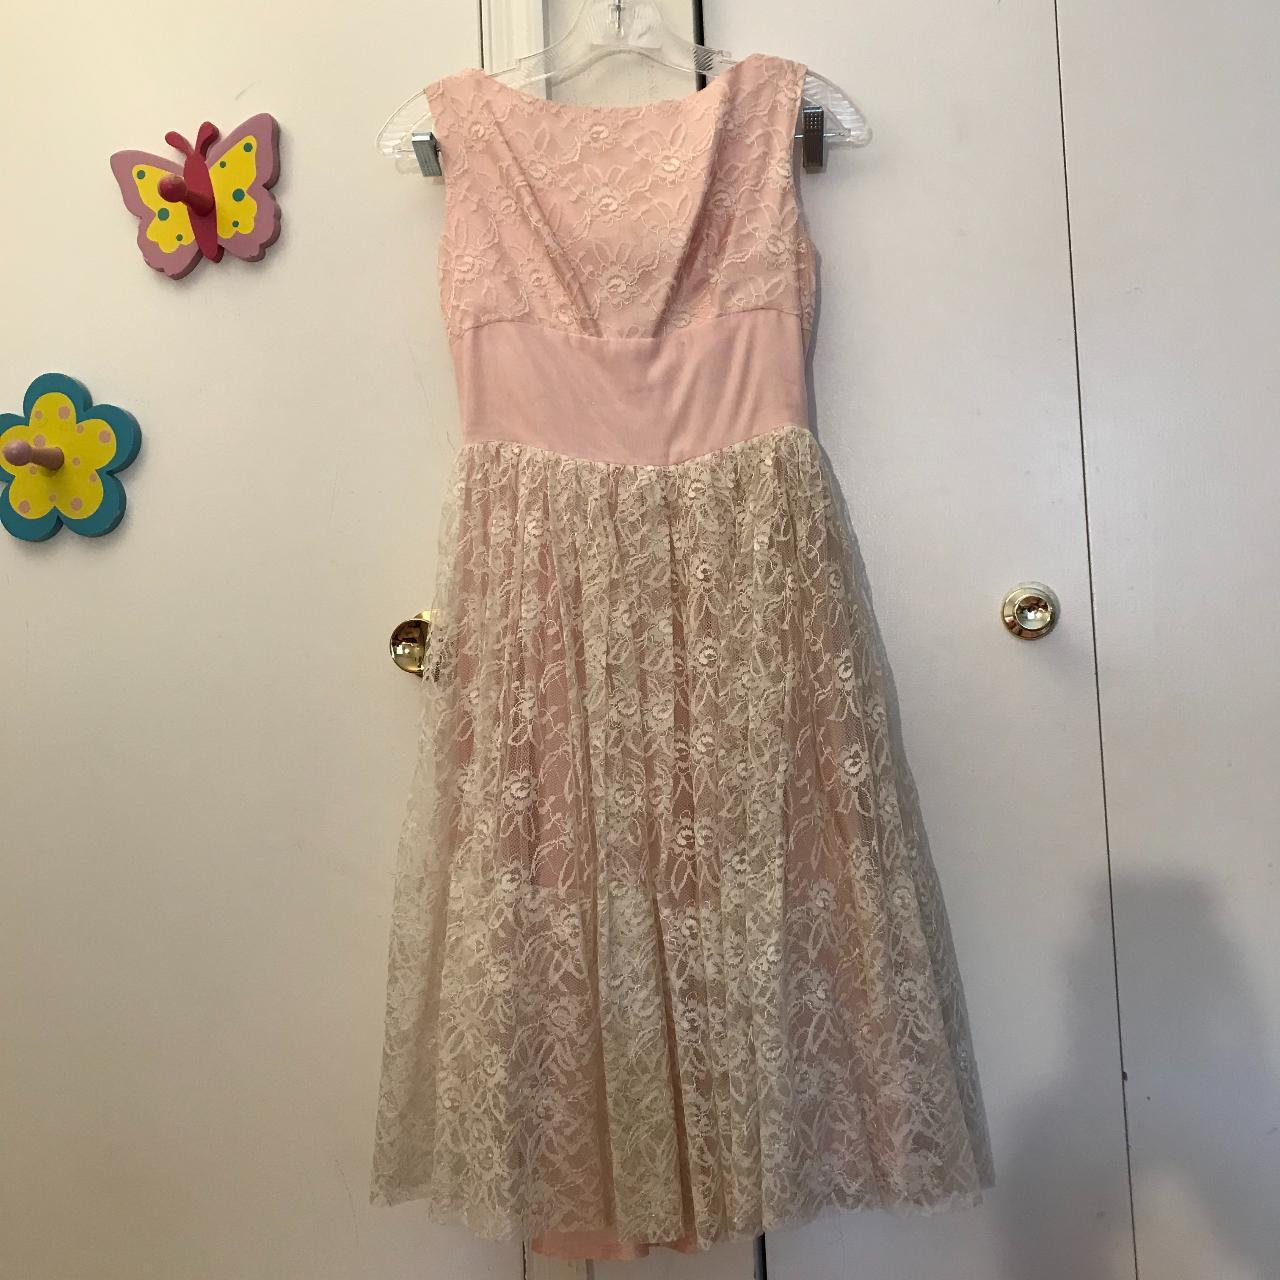 REAL VINTAGE 1950s party dress! Gorgeous pale pink... - Depop